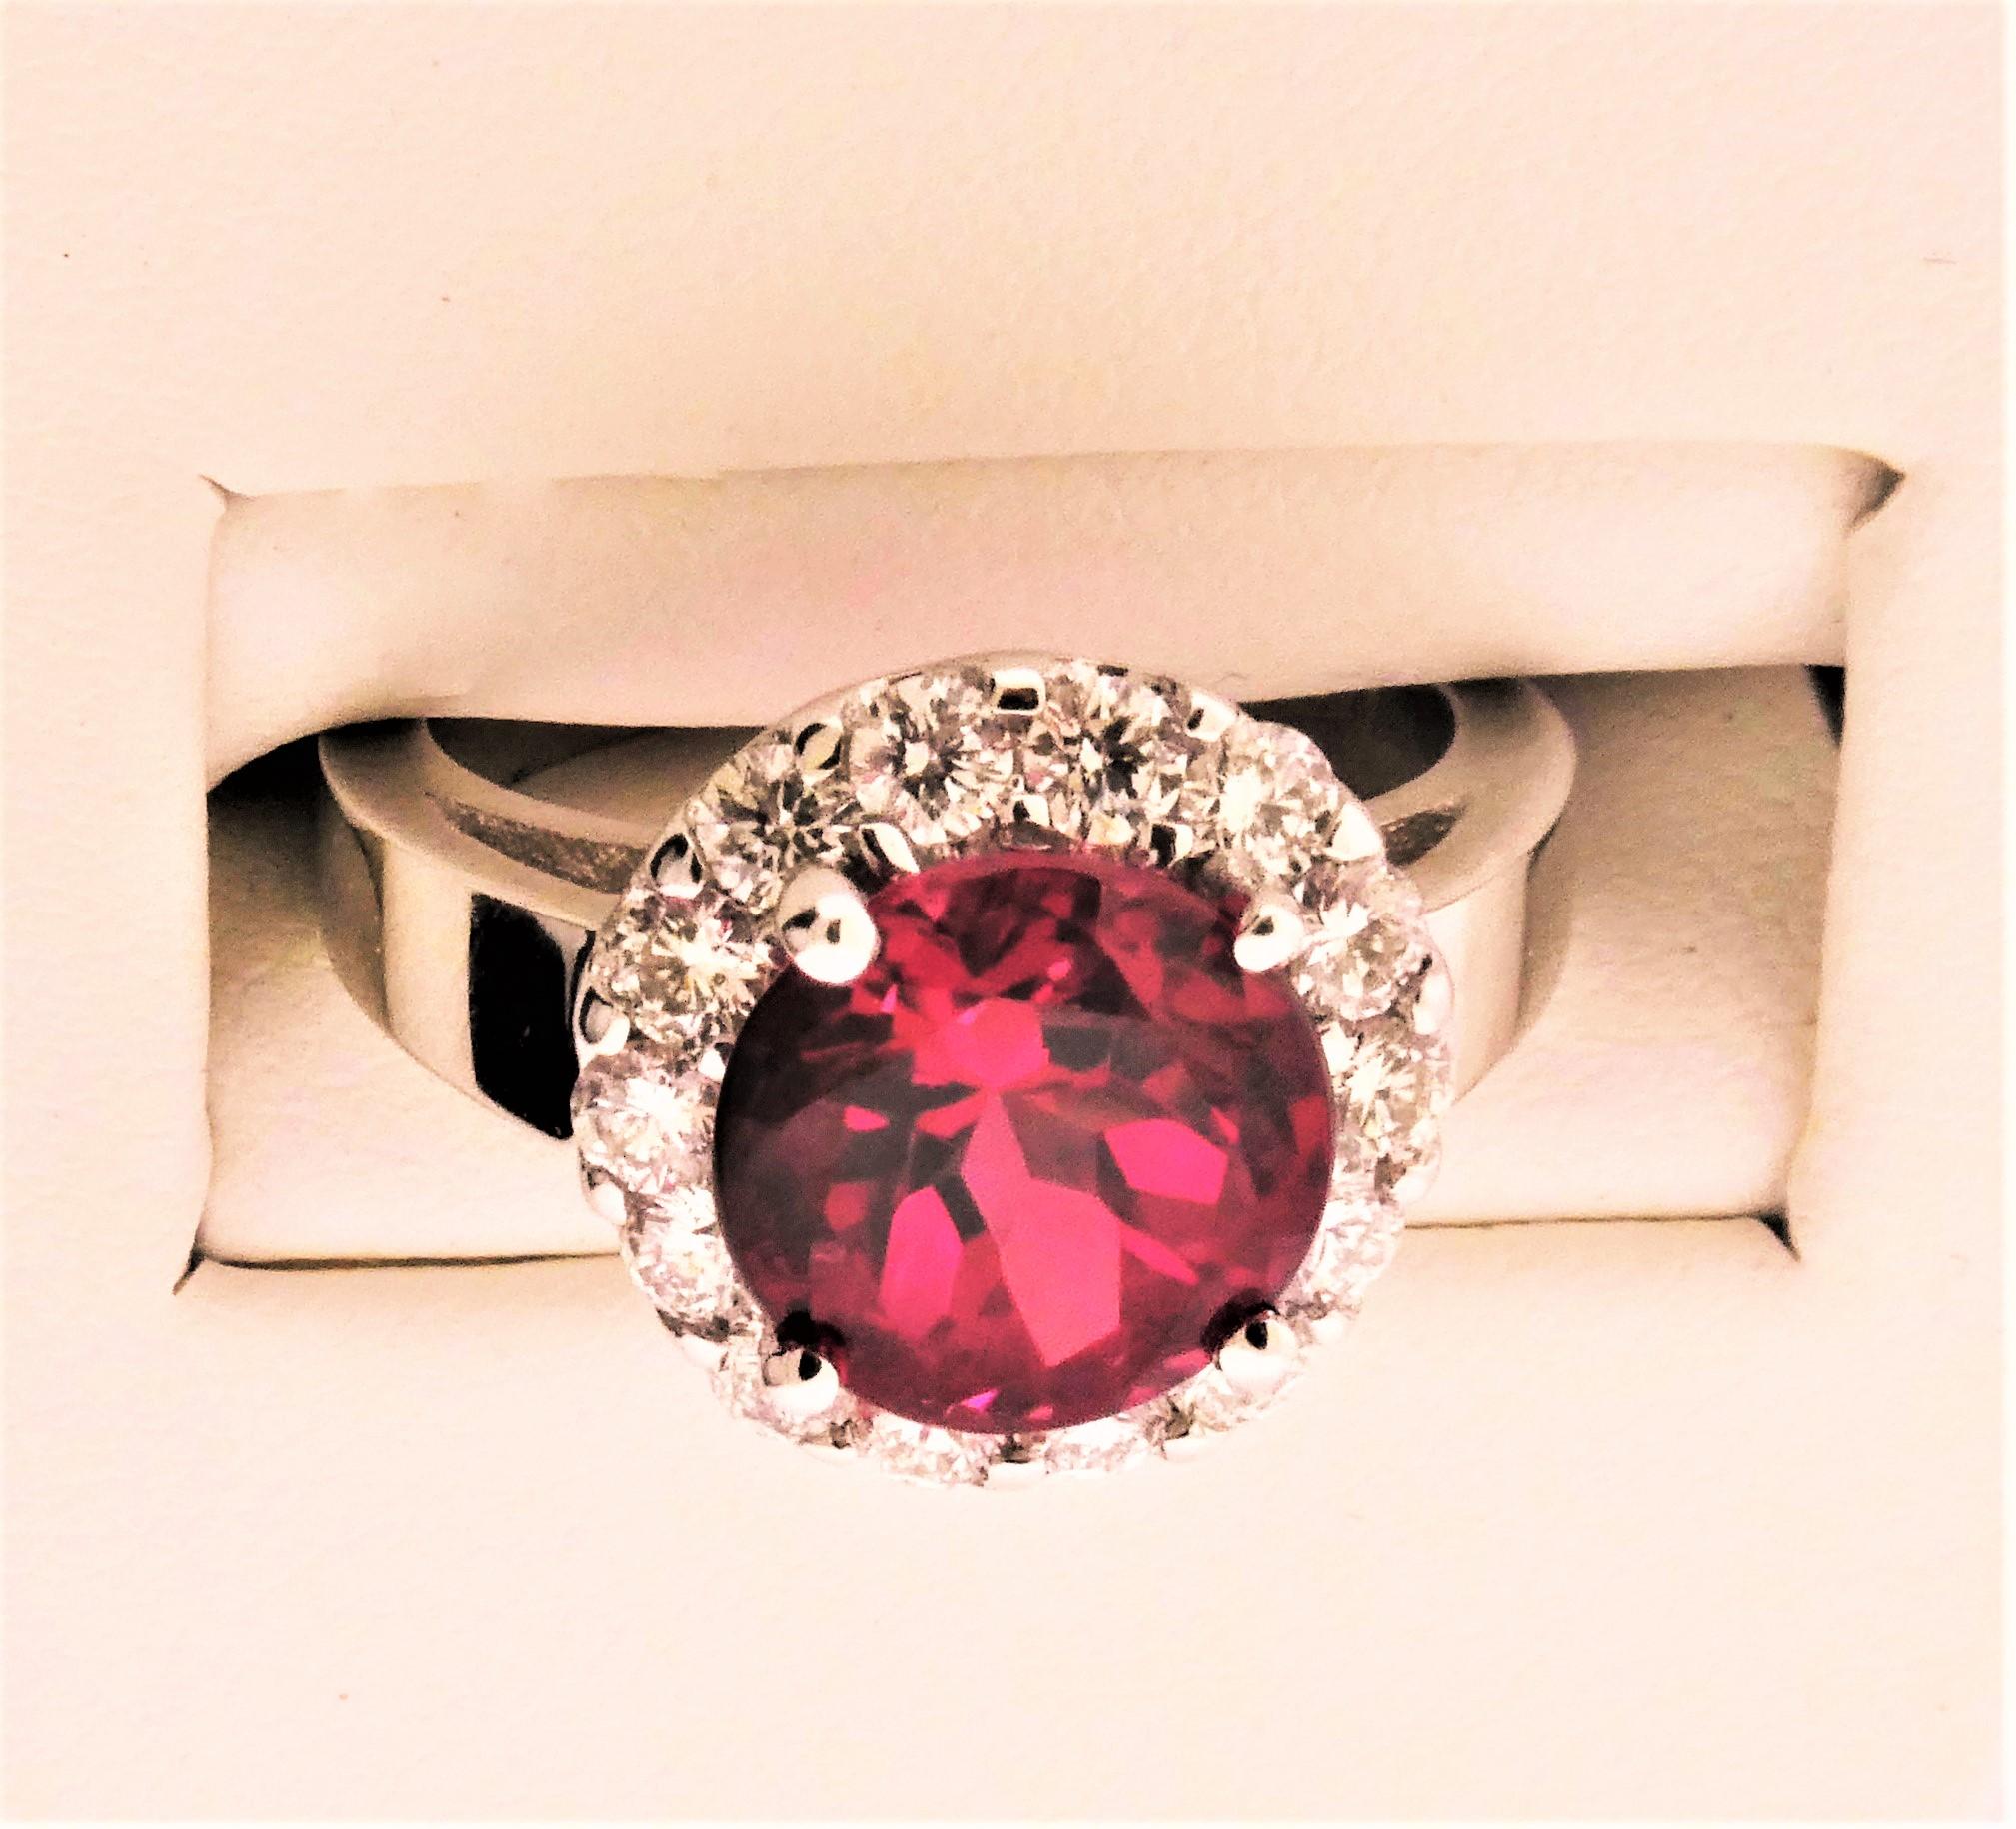 Nestled inside a Halo of G-H Color VS Clarity Diamonds is a very bright and lively Red Tourmaline that weighs 3.21 carats. There are 14 matching Diamonds that form the Halo and weigh 0.78 carats. The entire mounting is made in 14 Karat White Gold